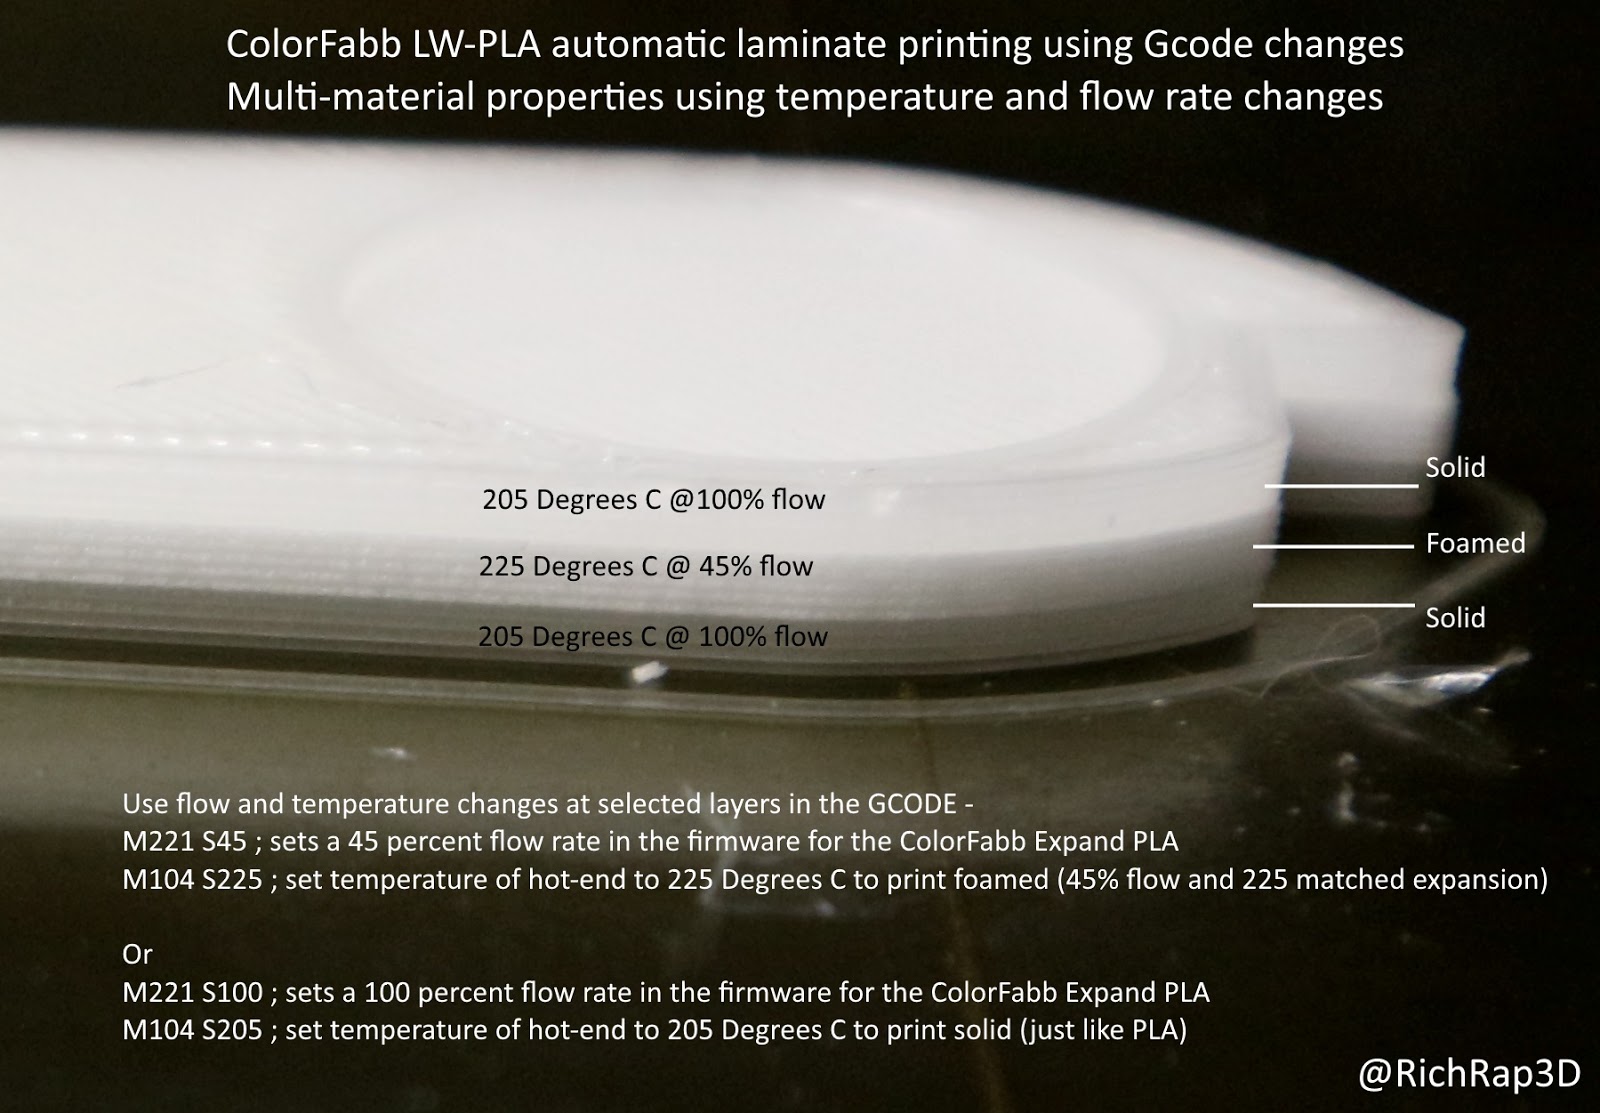 Reprap development and further adventures in DIY 3D printing: ColorFabb LW- PLA Expanding Foaming Plastic Filament for 3D Printing - Part 1 Testing and  experimentation